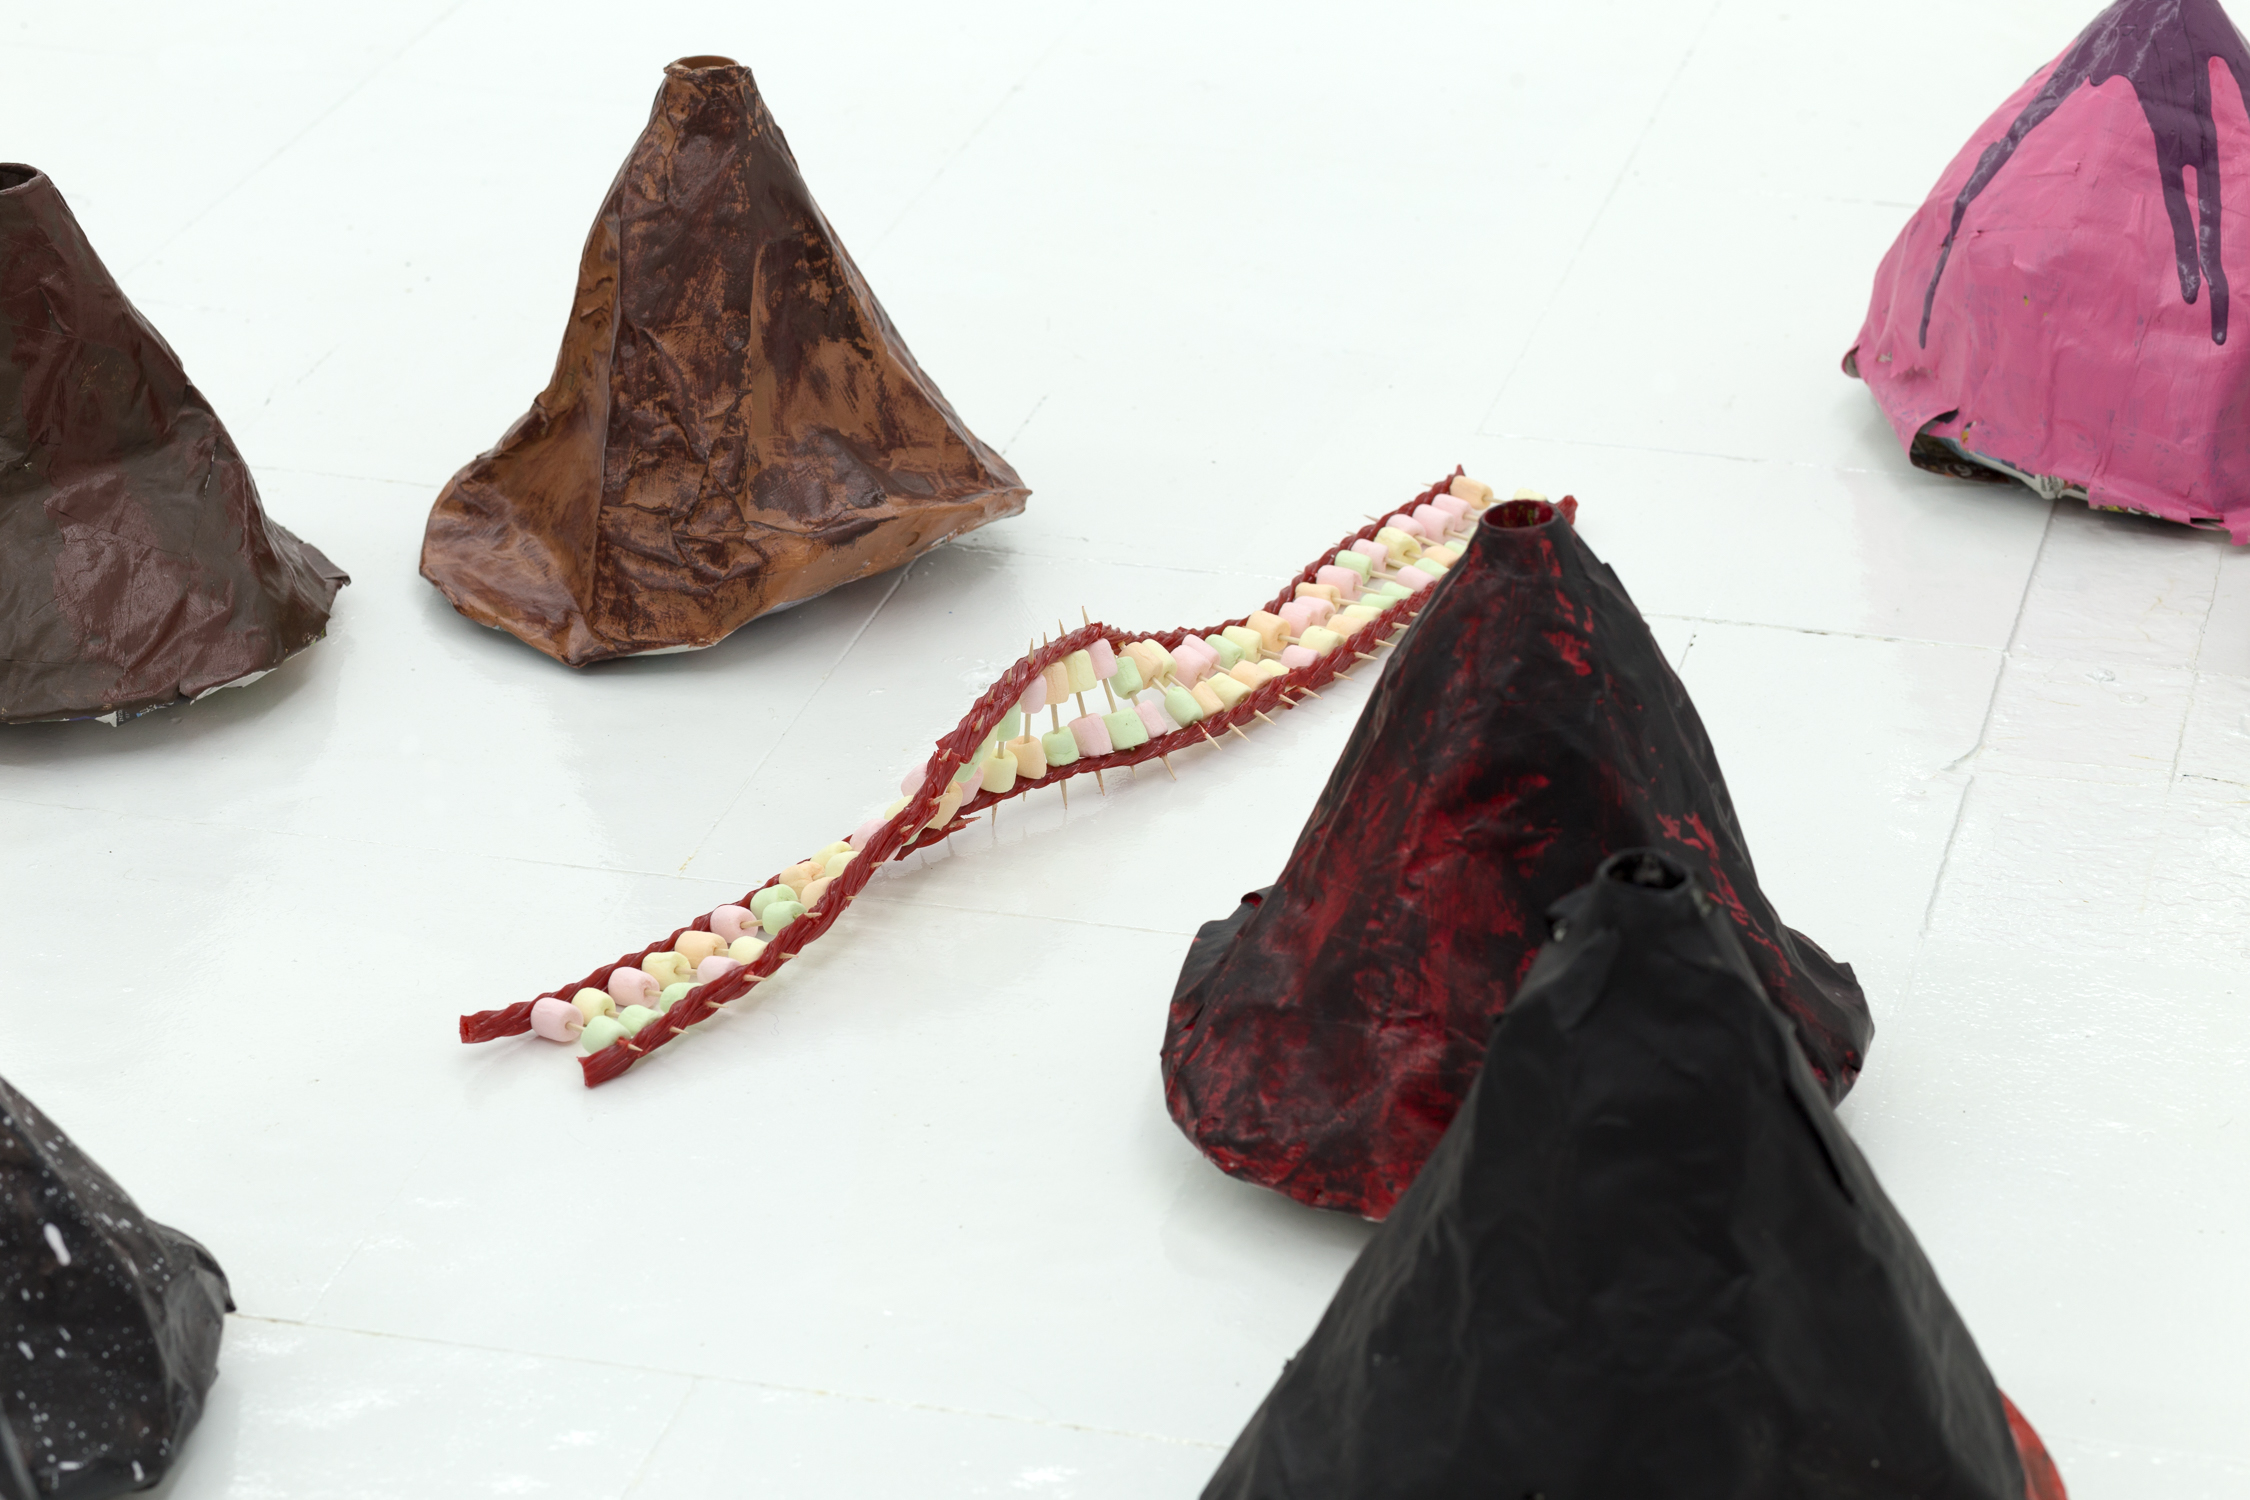 Close up of twisted candy and toothpick sculpture among volcanoes